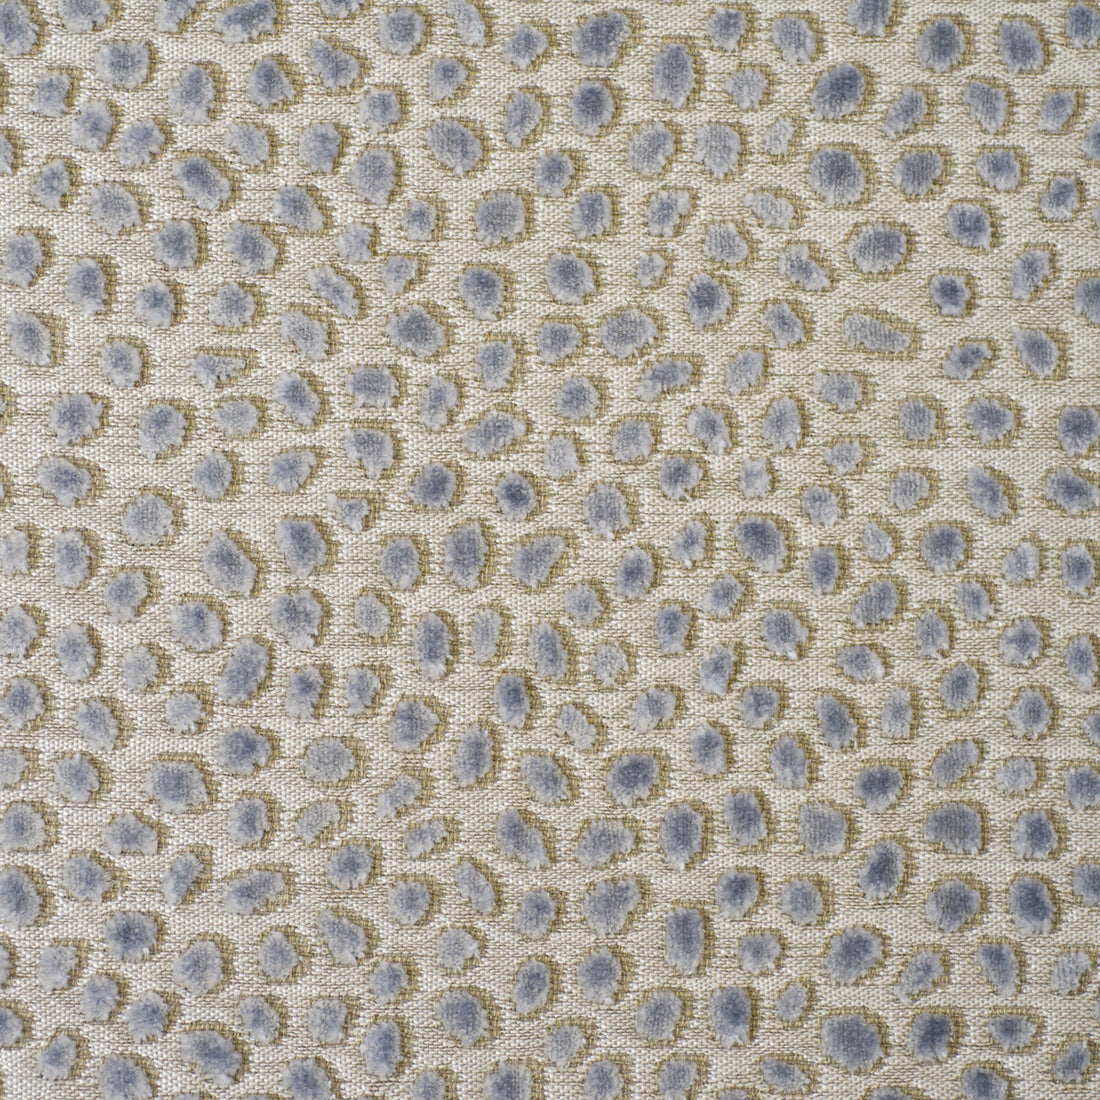 Cosma fabric in opal color - pattern PF50064.566.0 - by Baker Lifestyle in the Foxwood collection